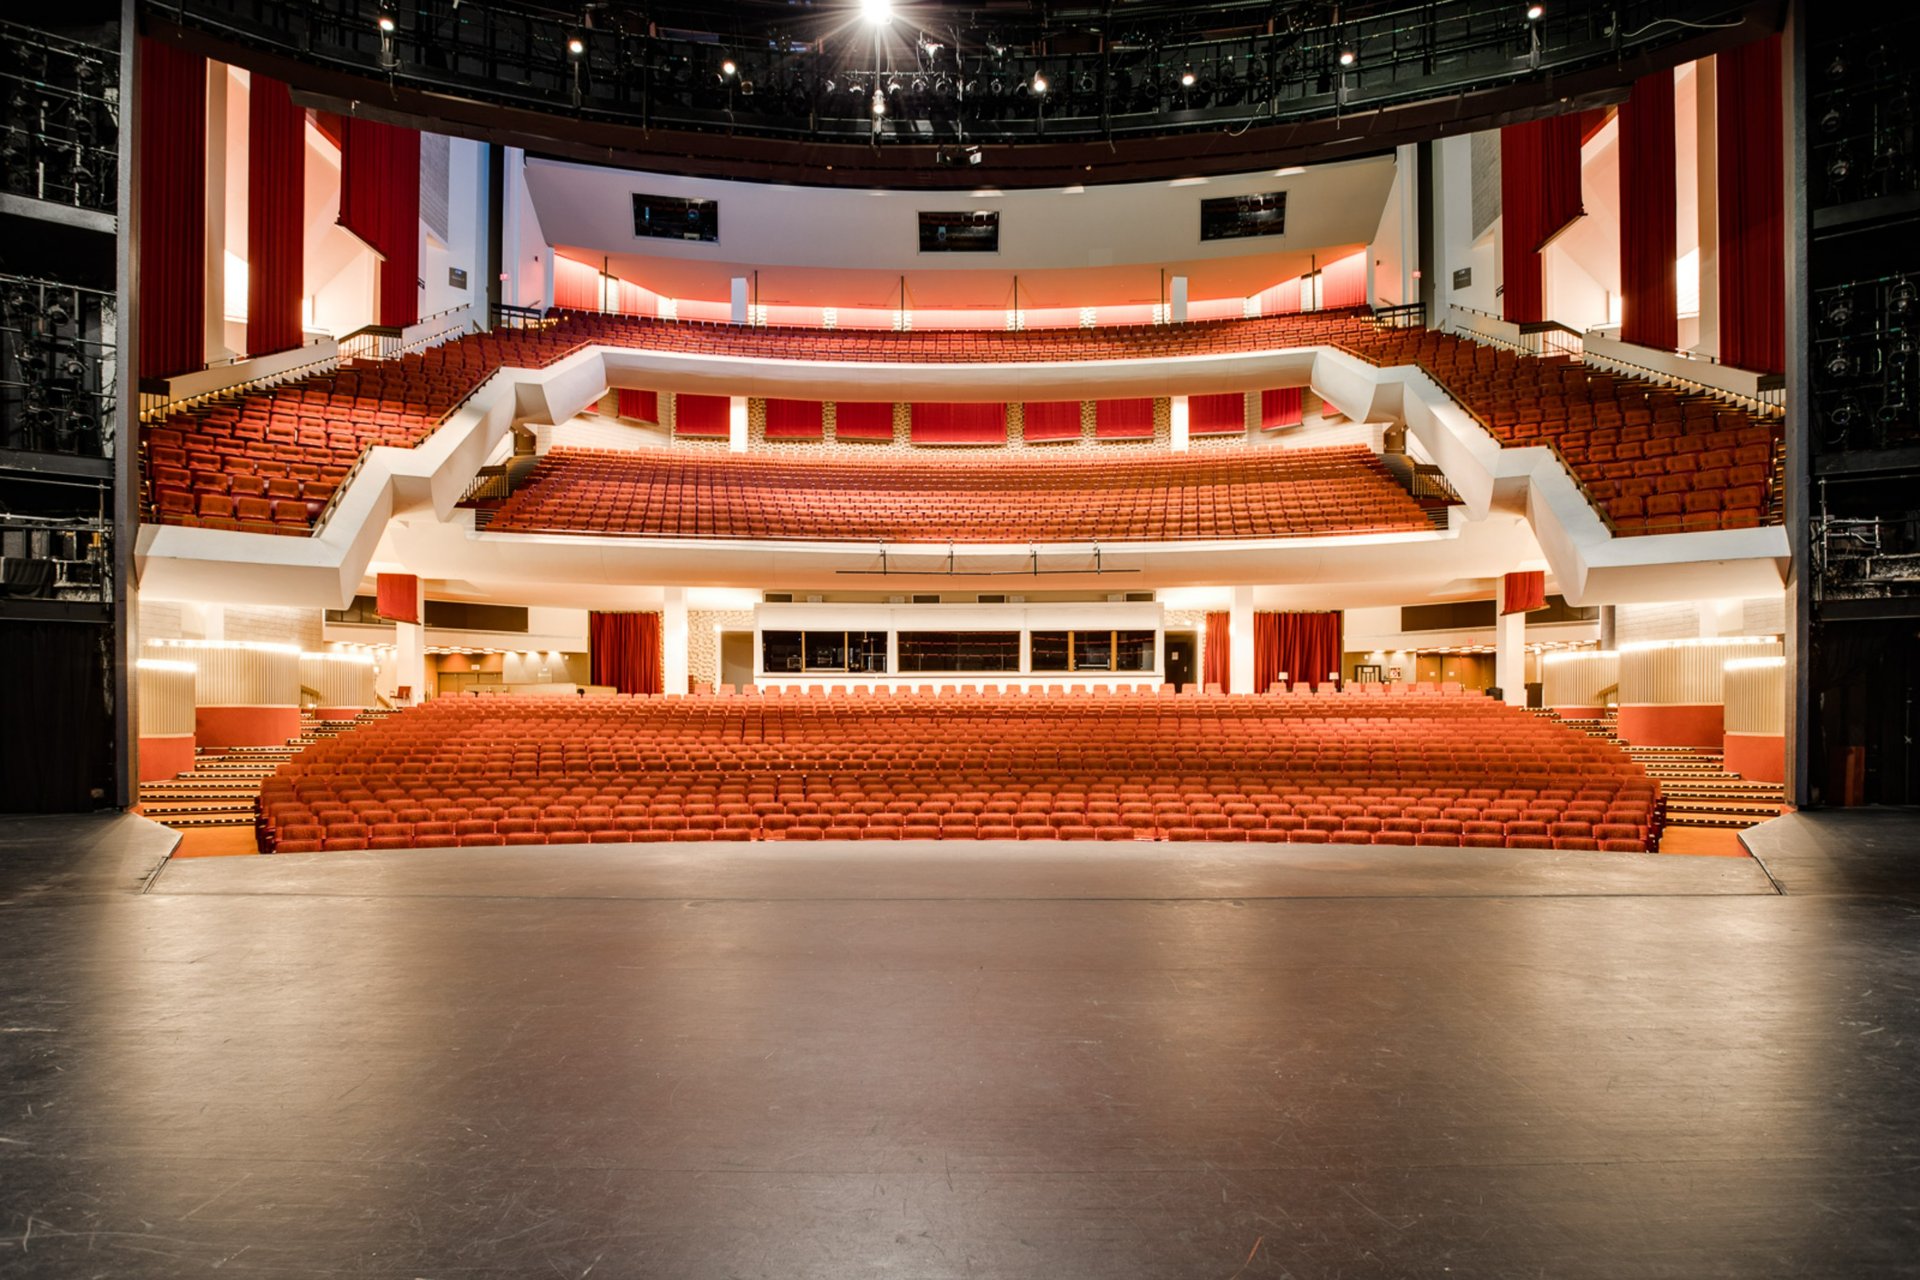 Tennessee Performing Arts Center Performance Space in Nashville, TN